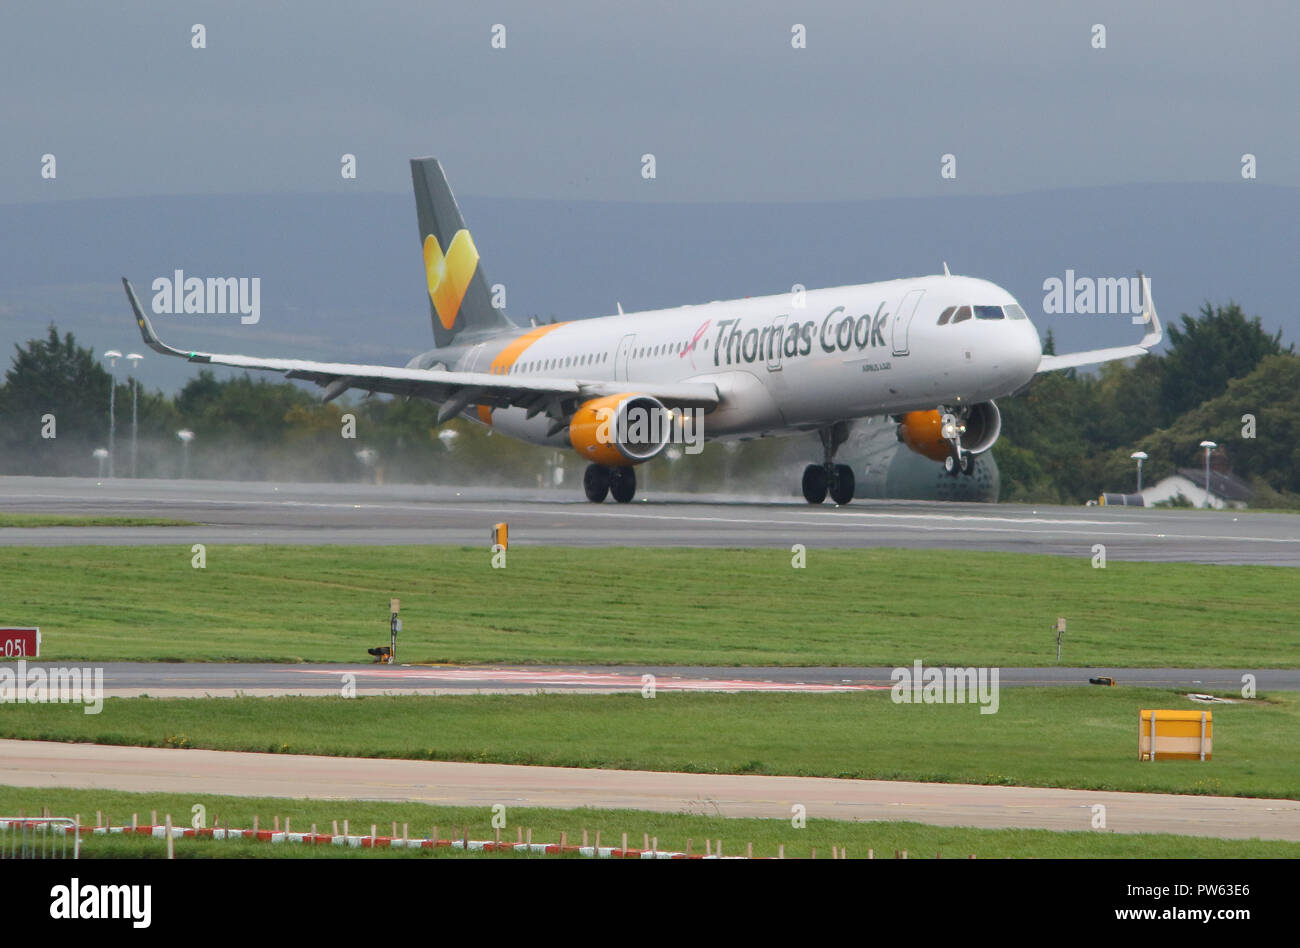 13 October 2018. Manchester Airport, Manchester, UK. Planes were buffeted by strong crosswinds and turbulence as they came in to land at the North West England Regional Airport. Storm Callum has brought torrential rain and high winds to the region over the last couple of days.Photos by Phil Taylor Tel 07947390596 email philtaylorphoto@gmail.com Stock Photo